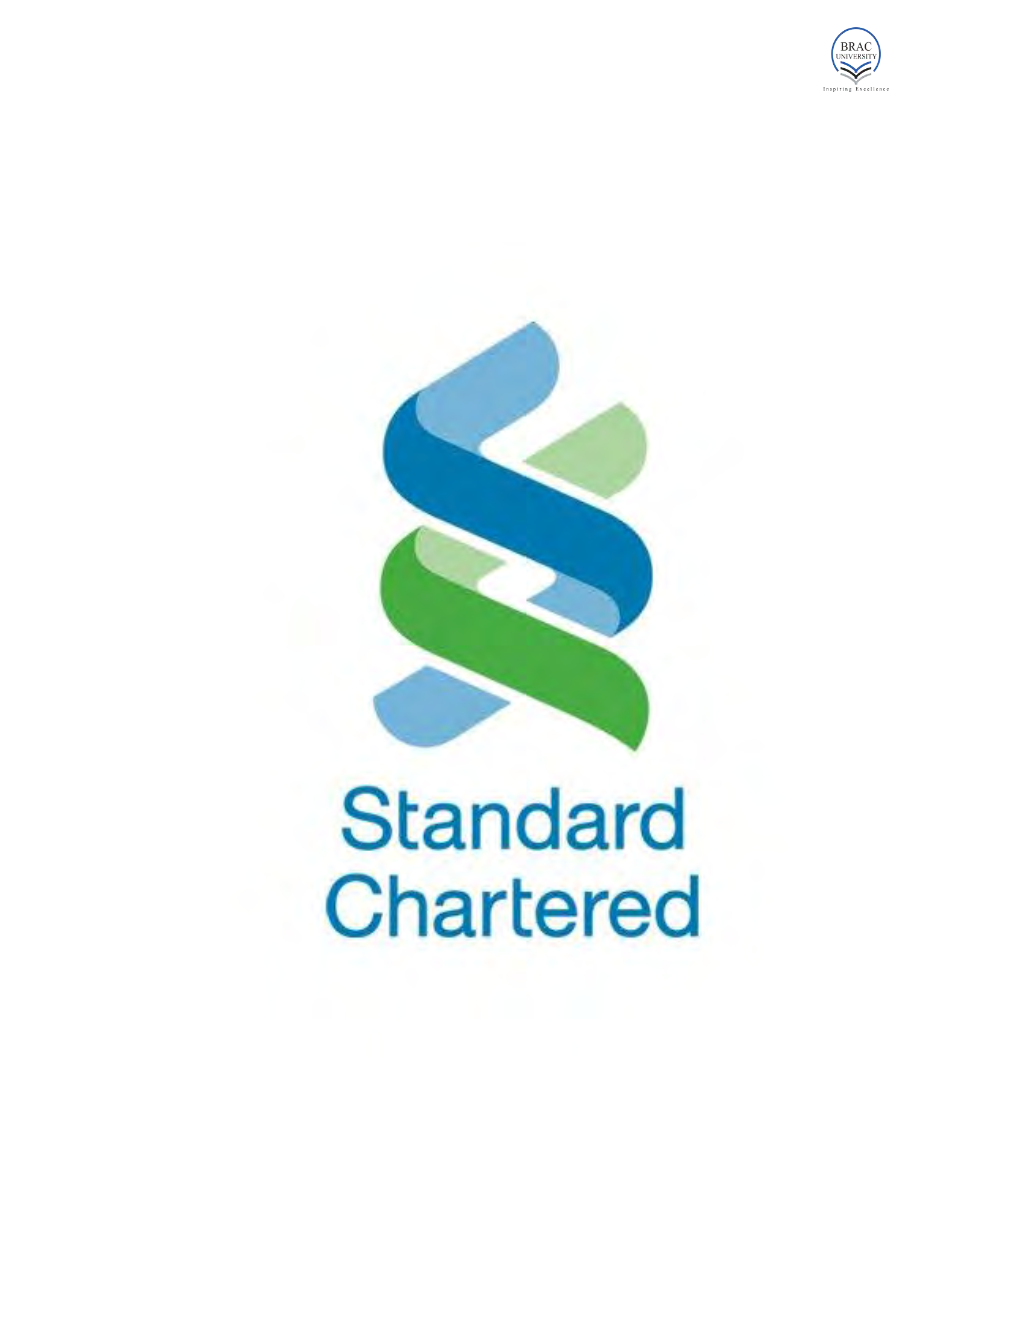 Customer Satisfaction of Standard Chartered Bank Compared to Other Banks